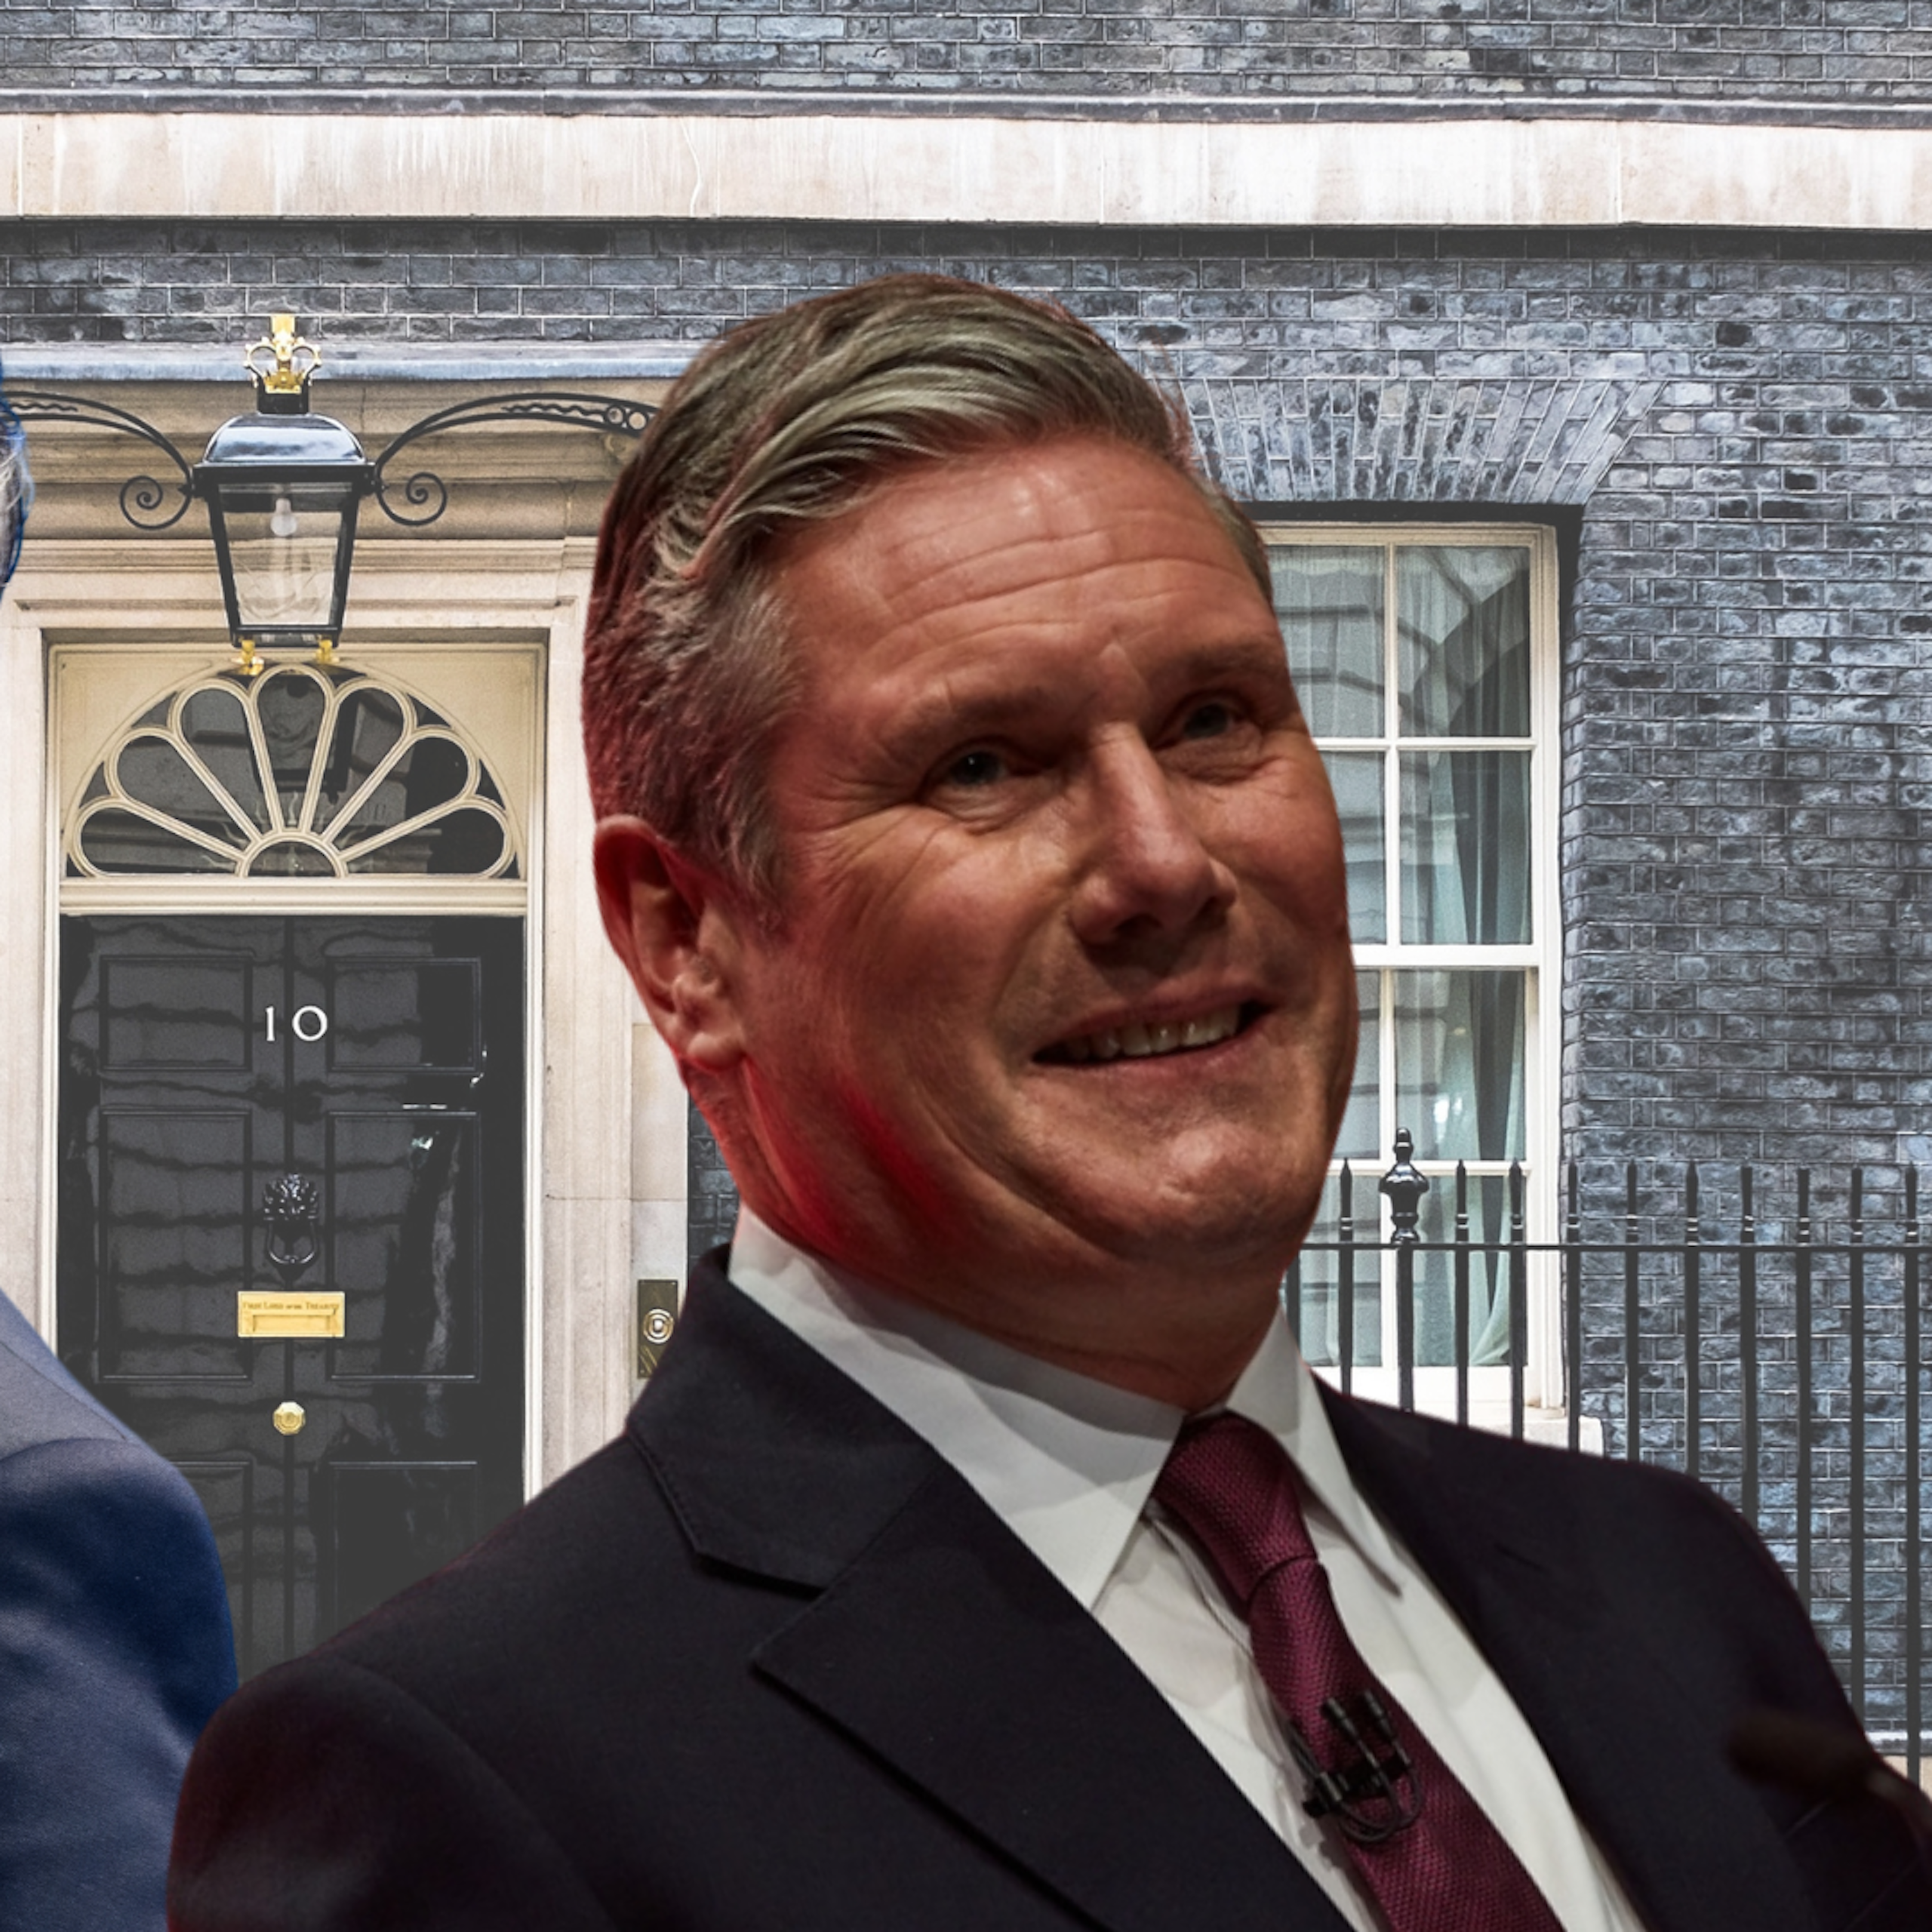 Collage of Rishi Sunak and Keir Starmer, both smiling, over a background of Number 10 Downing Street